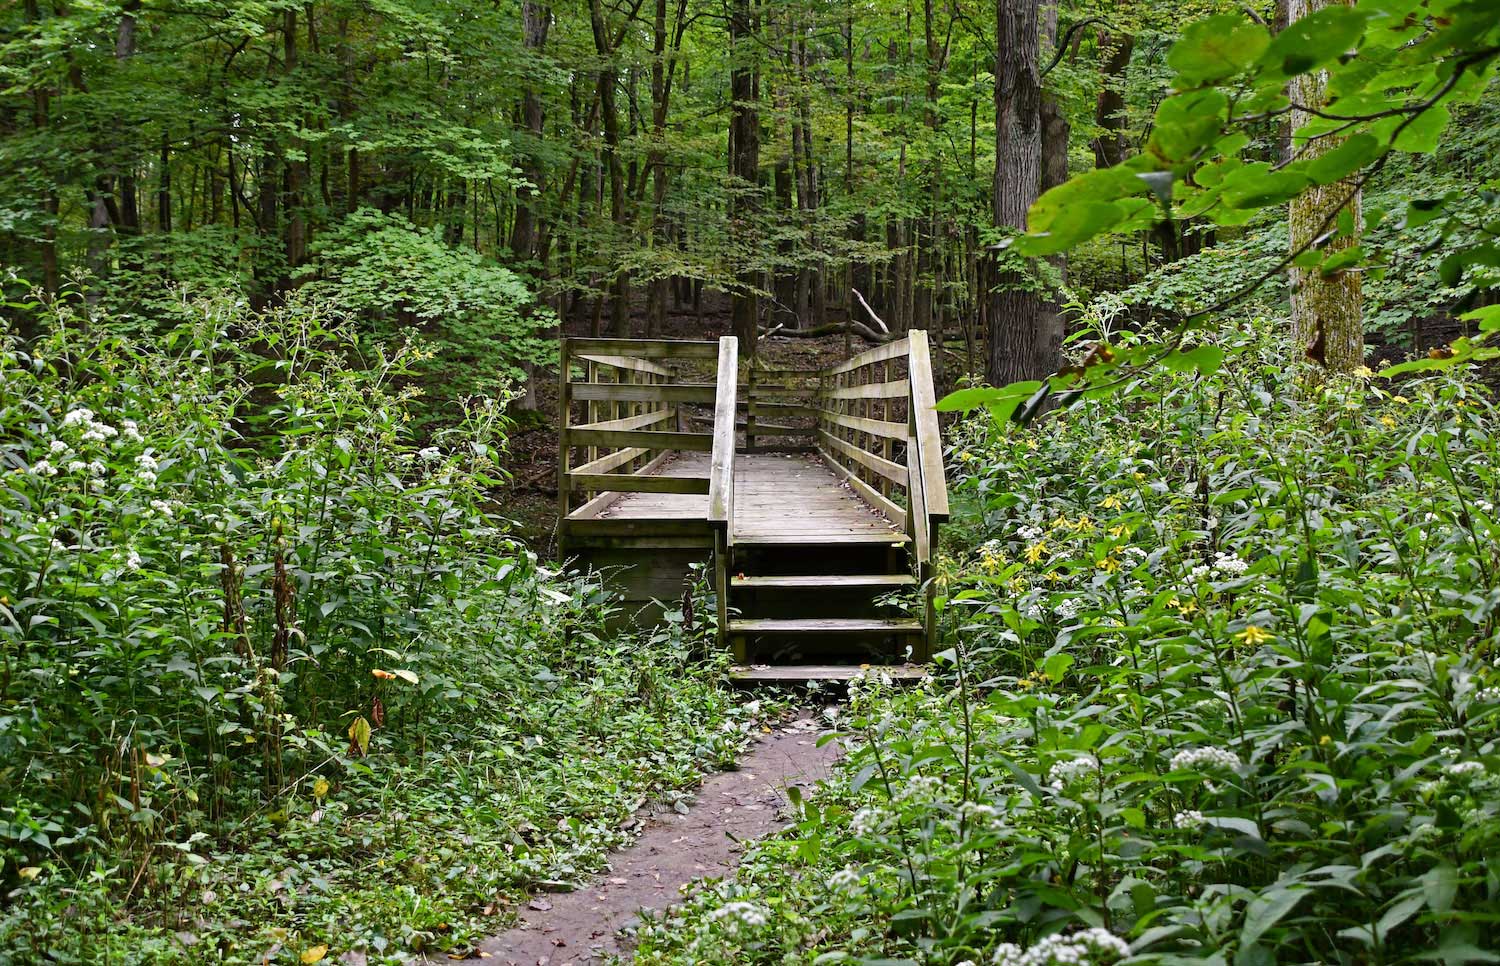 Wooden stairs to an elevated boardwalk along a forest trail.